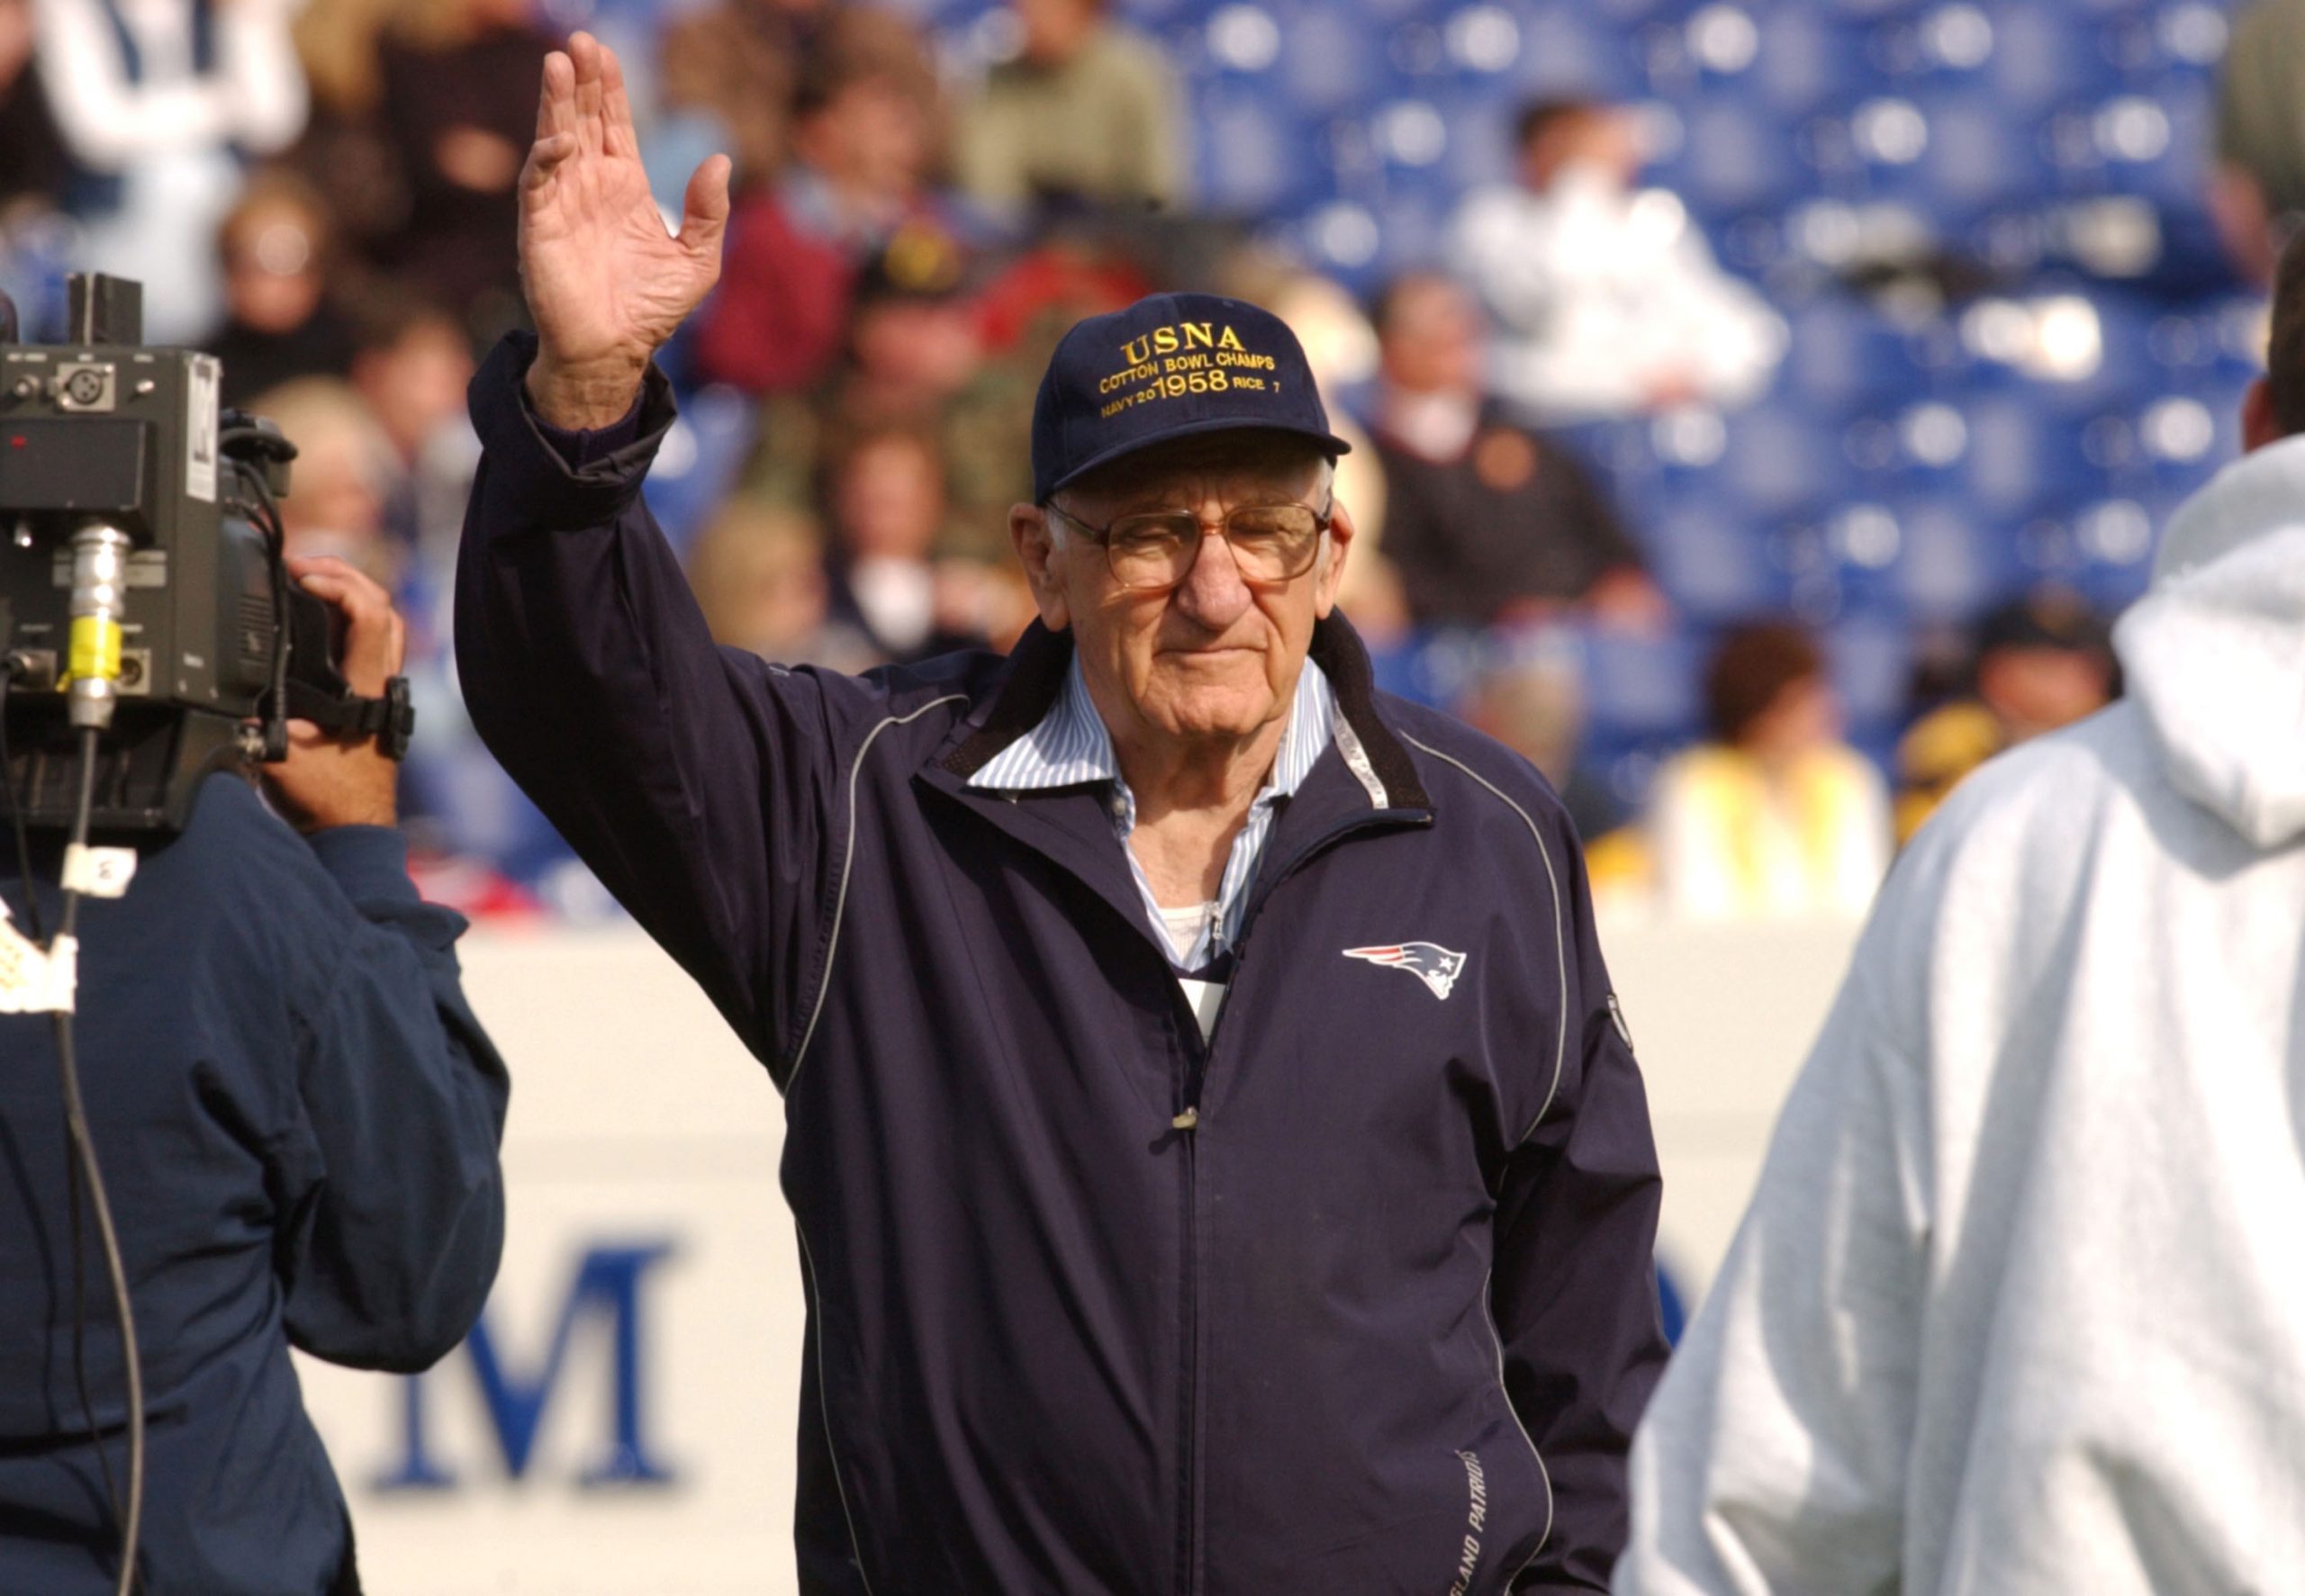 Steve Belichick, father of Bill Belichick, was honored at halftime of a Navy football game in 2003.